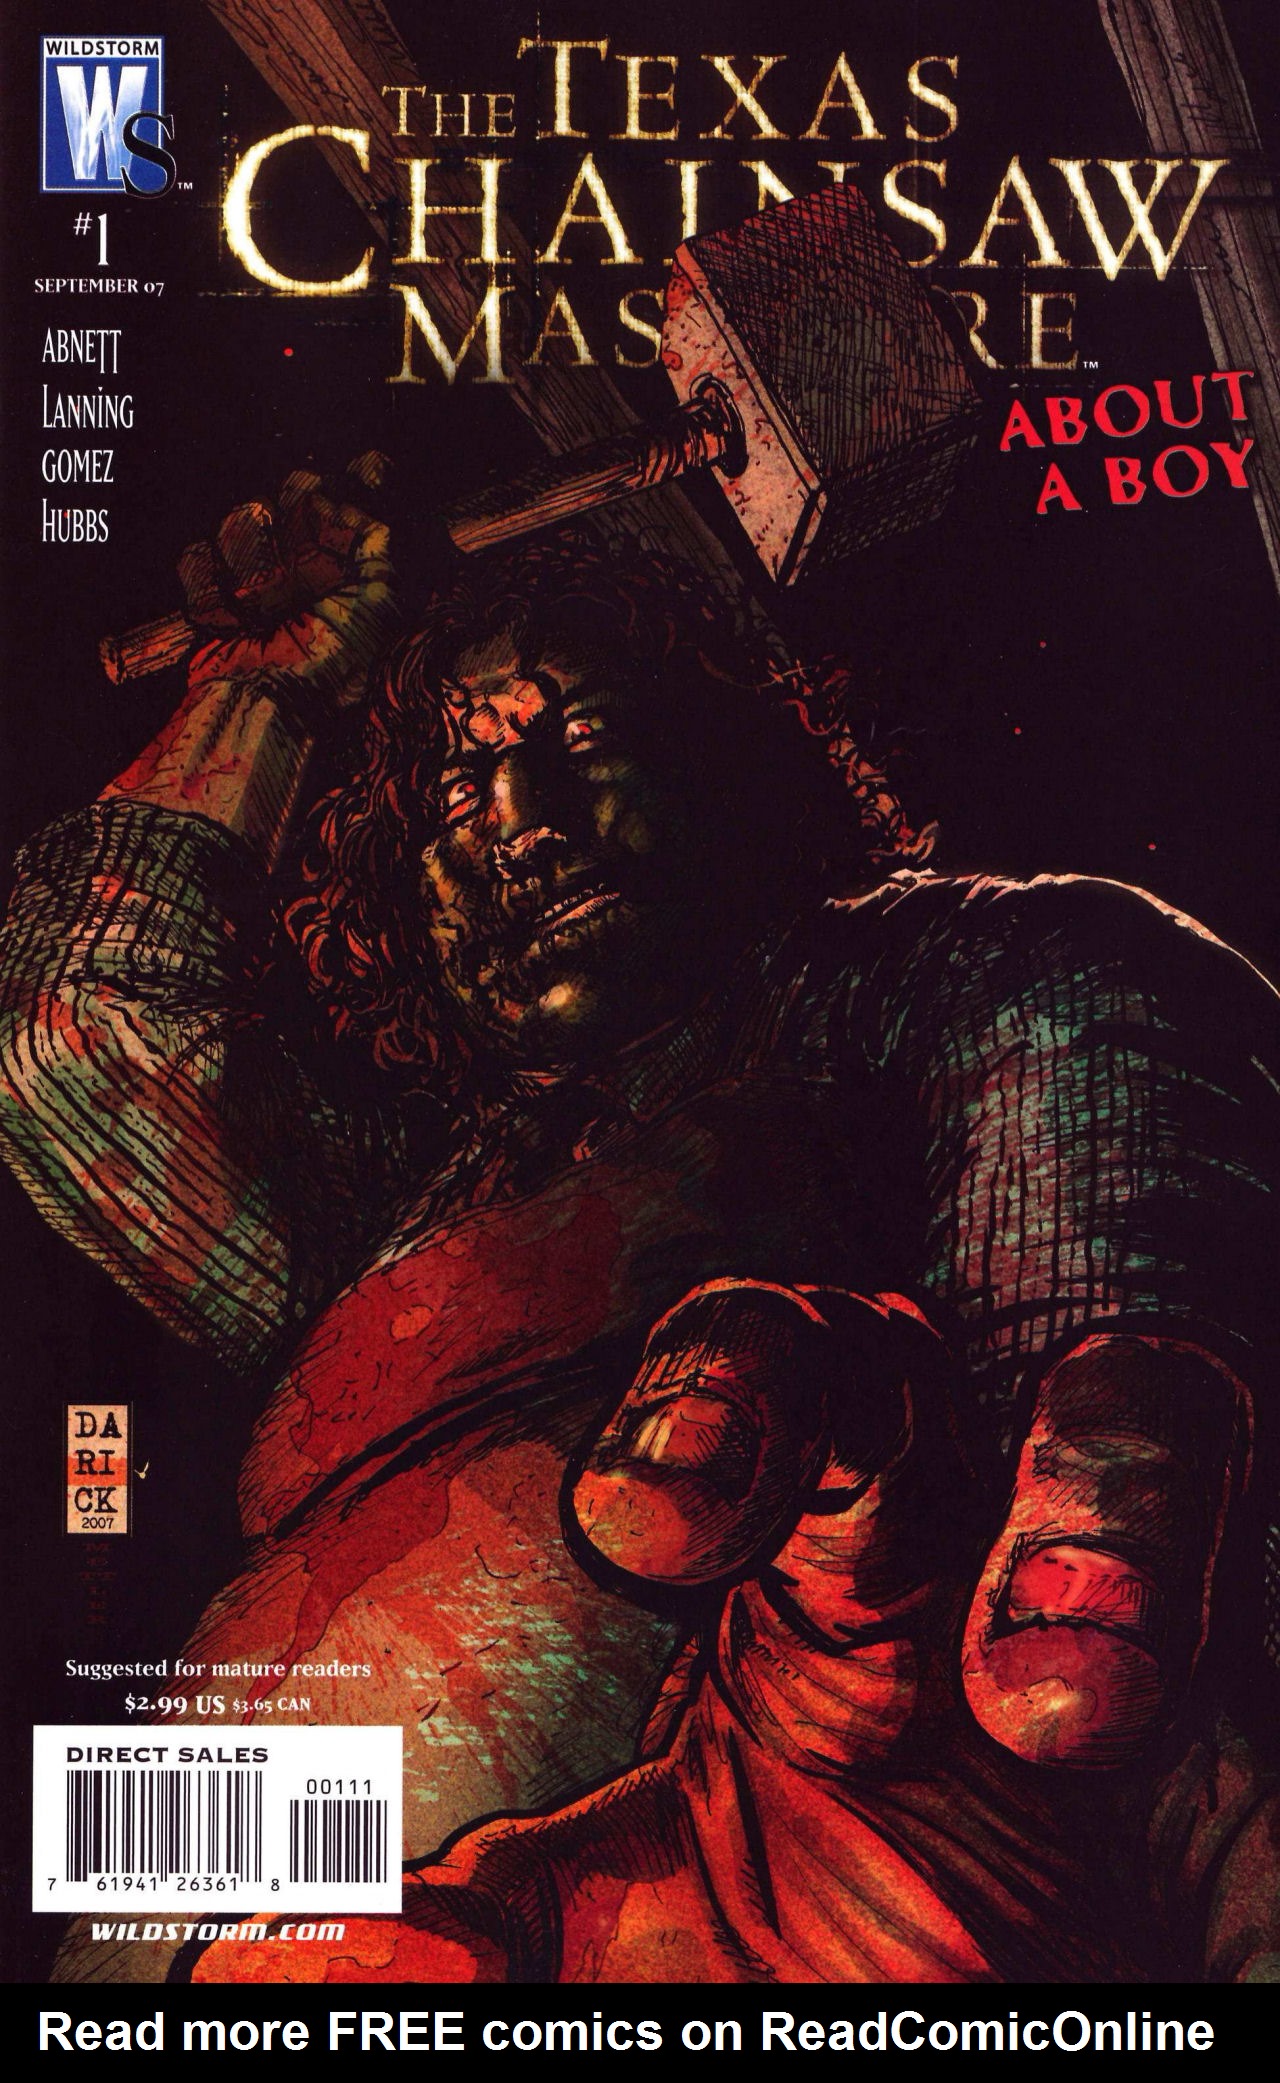 Read online The Texas Chainsaw Massacre: About a Boy comic -  Issue # Full - 1